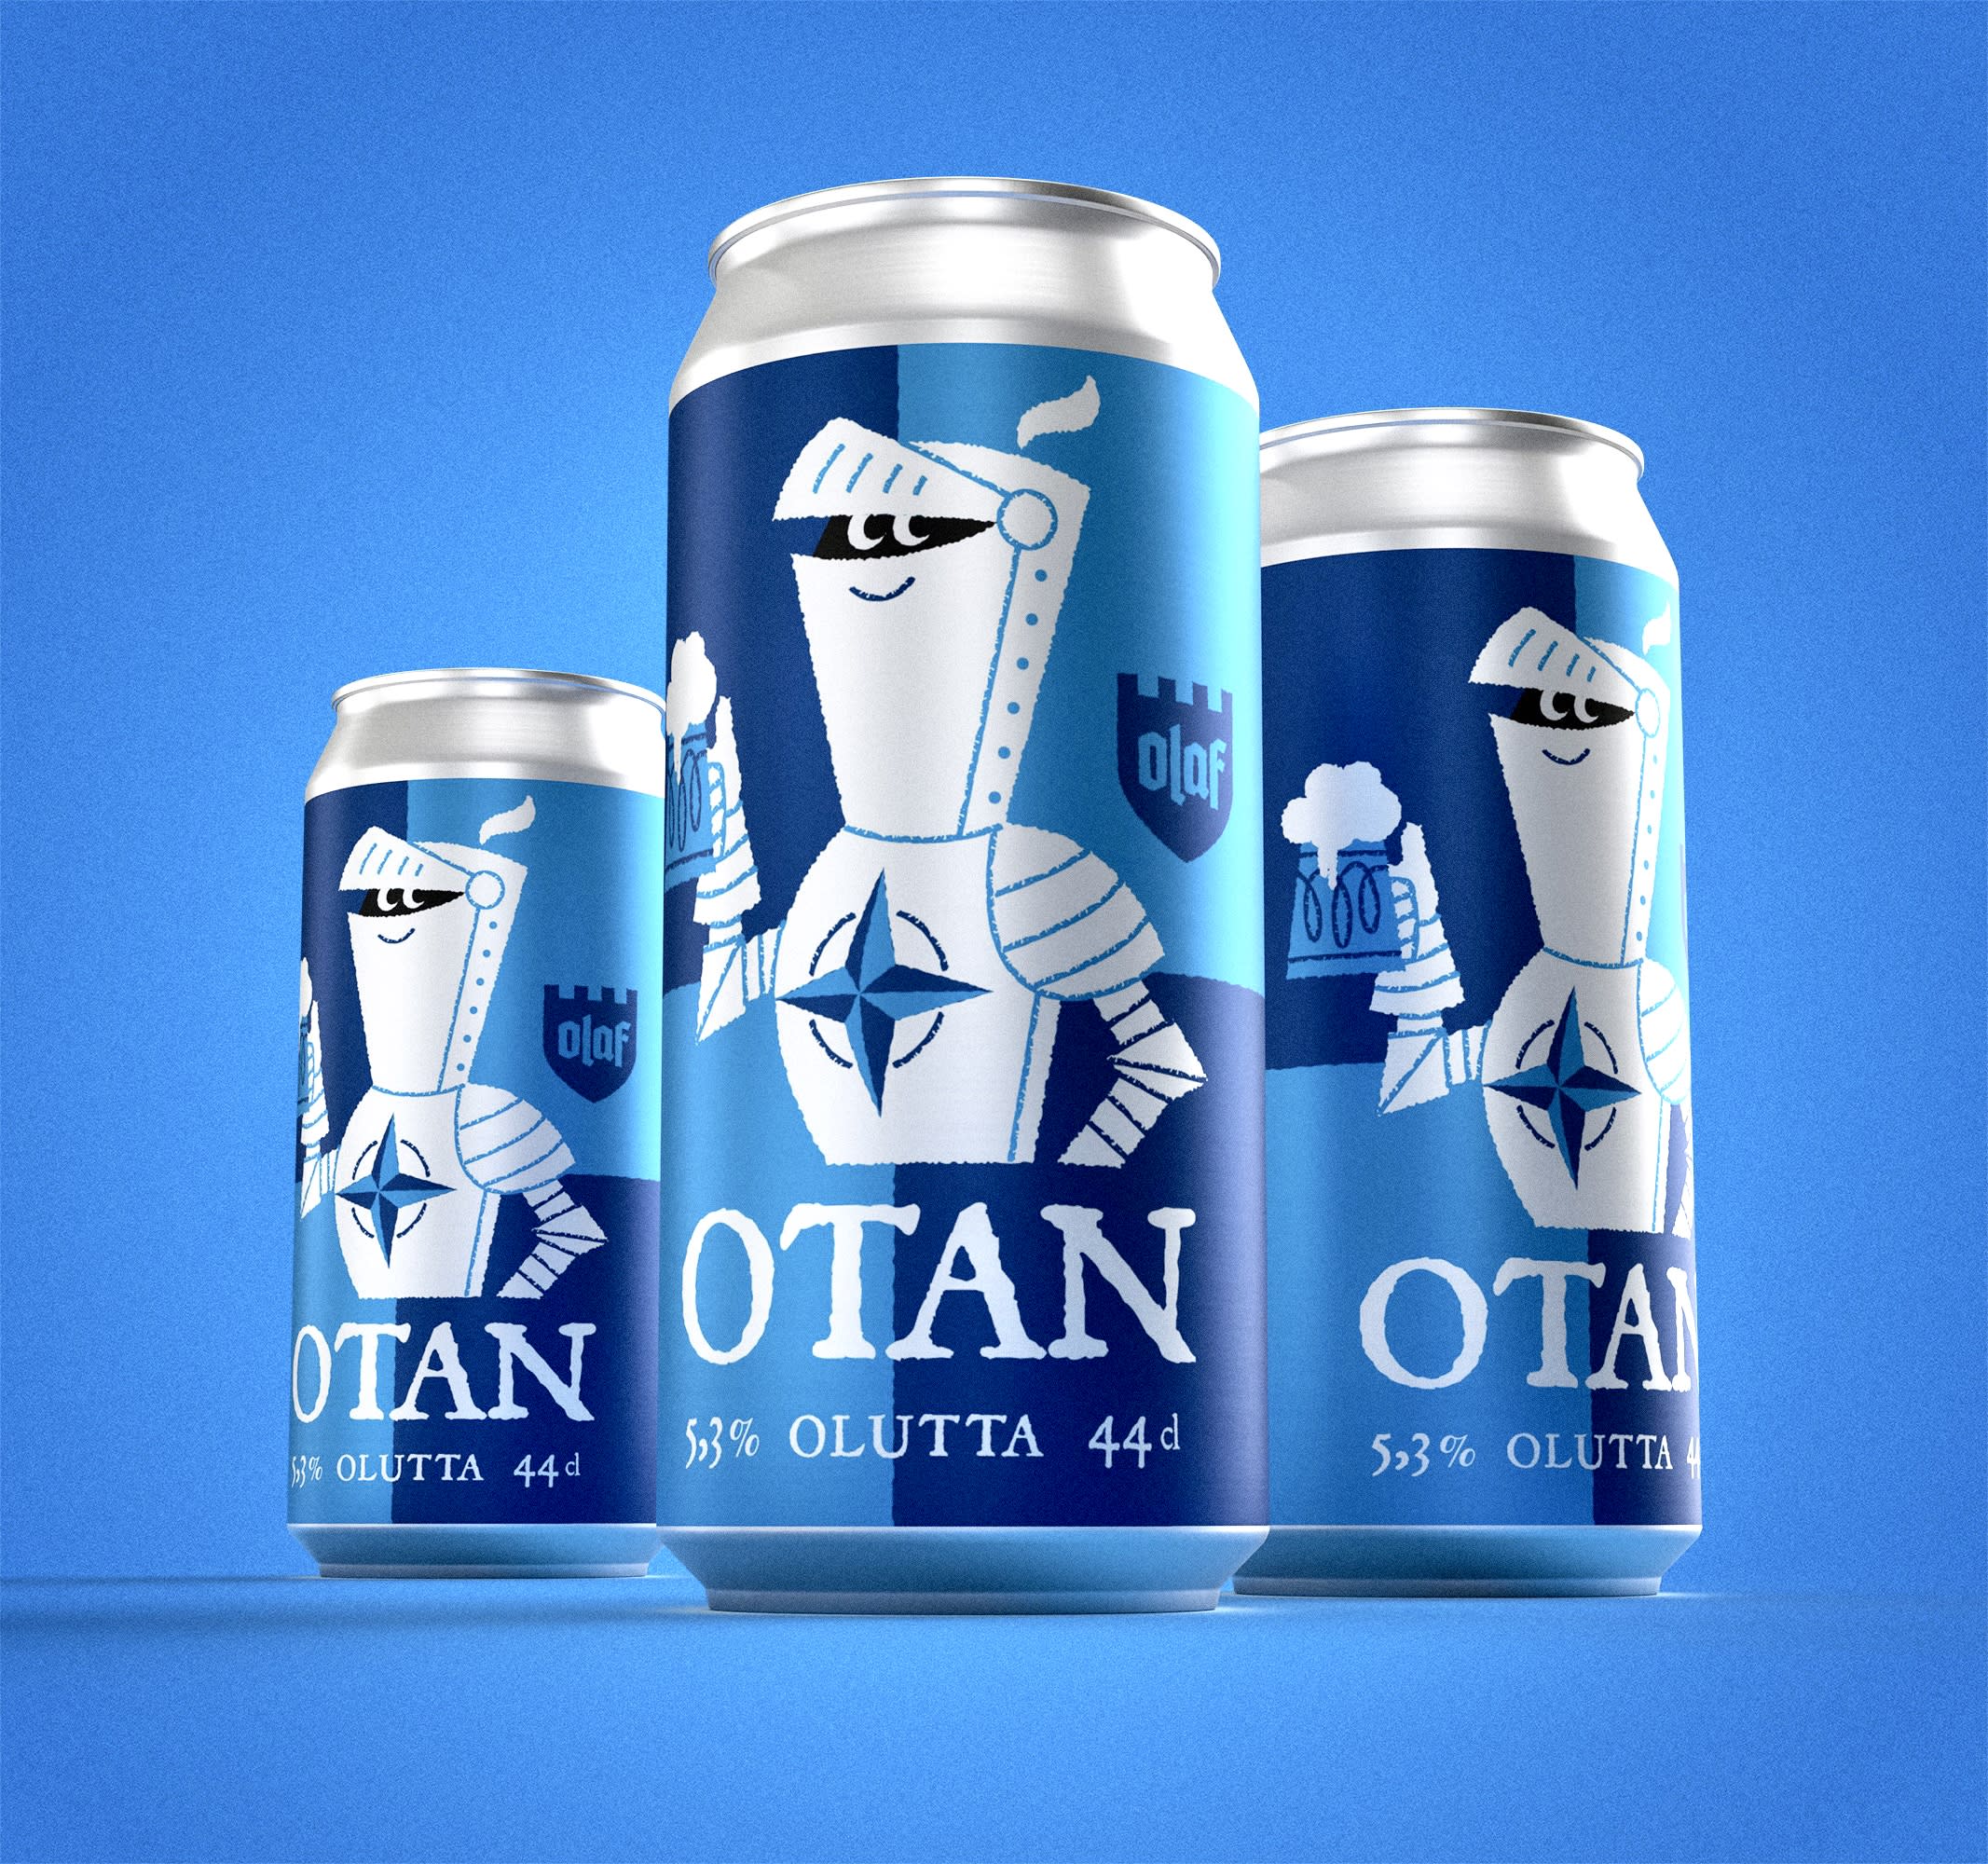 Finnish brewery launches NATO beer